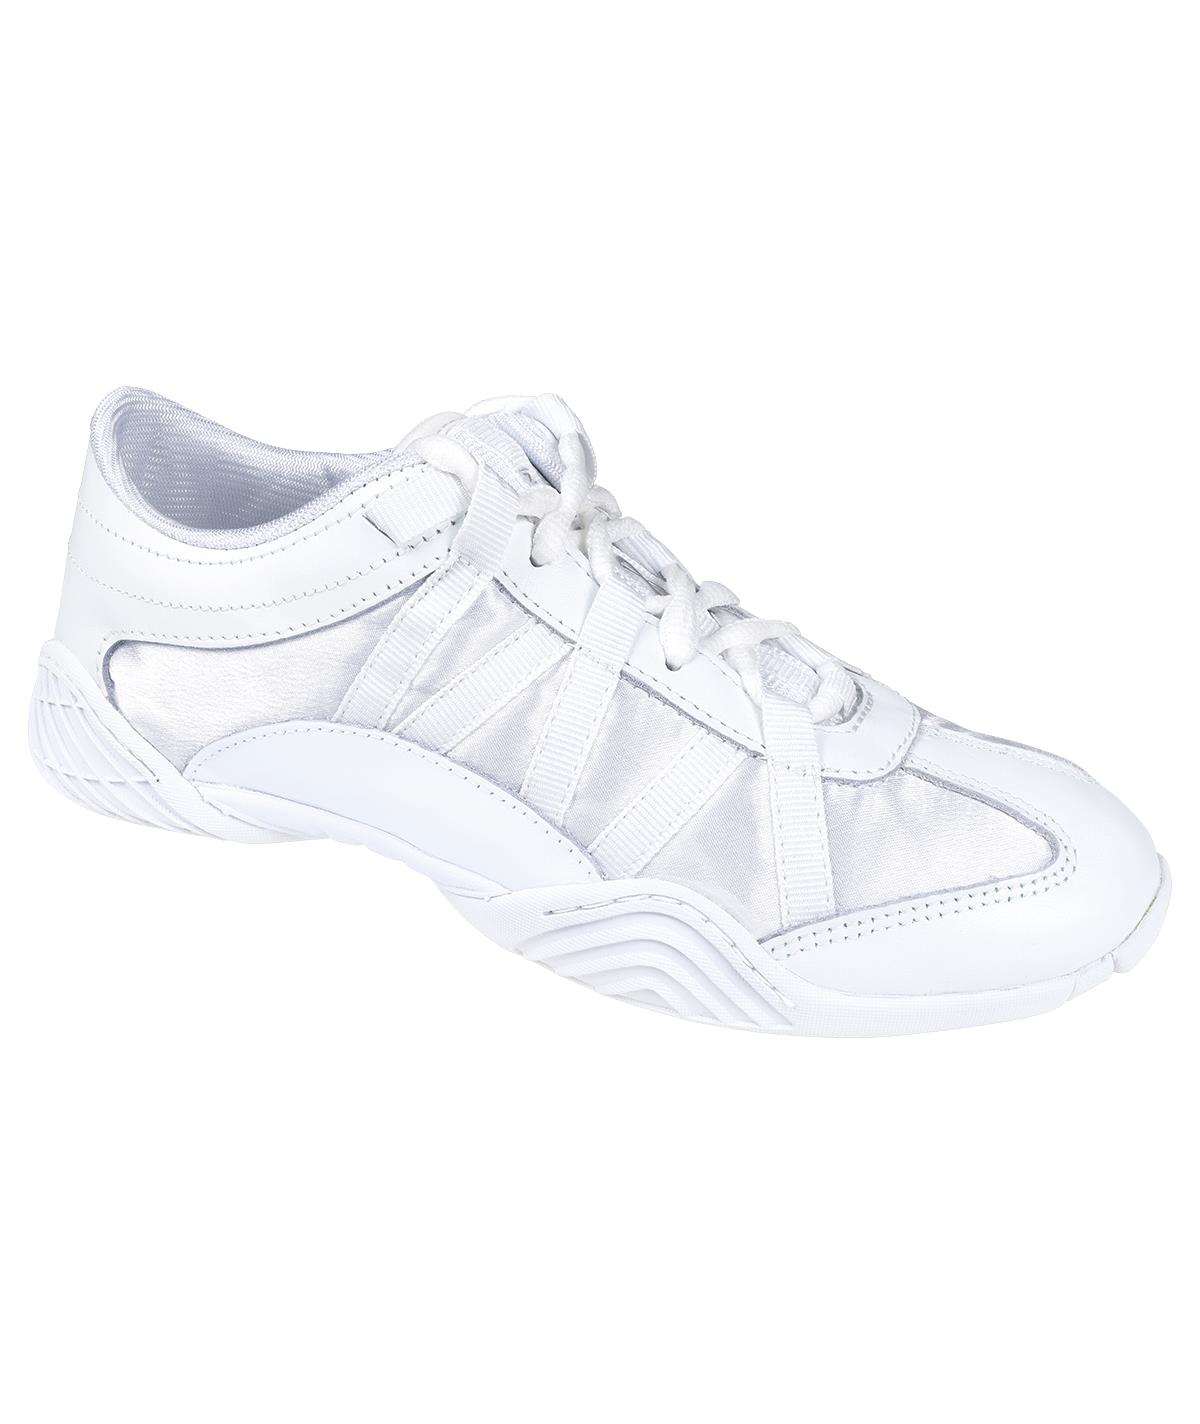 Nfinity Adult Evolution Cheer Shoes